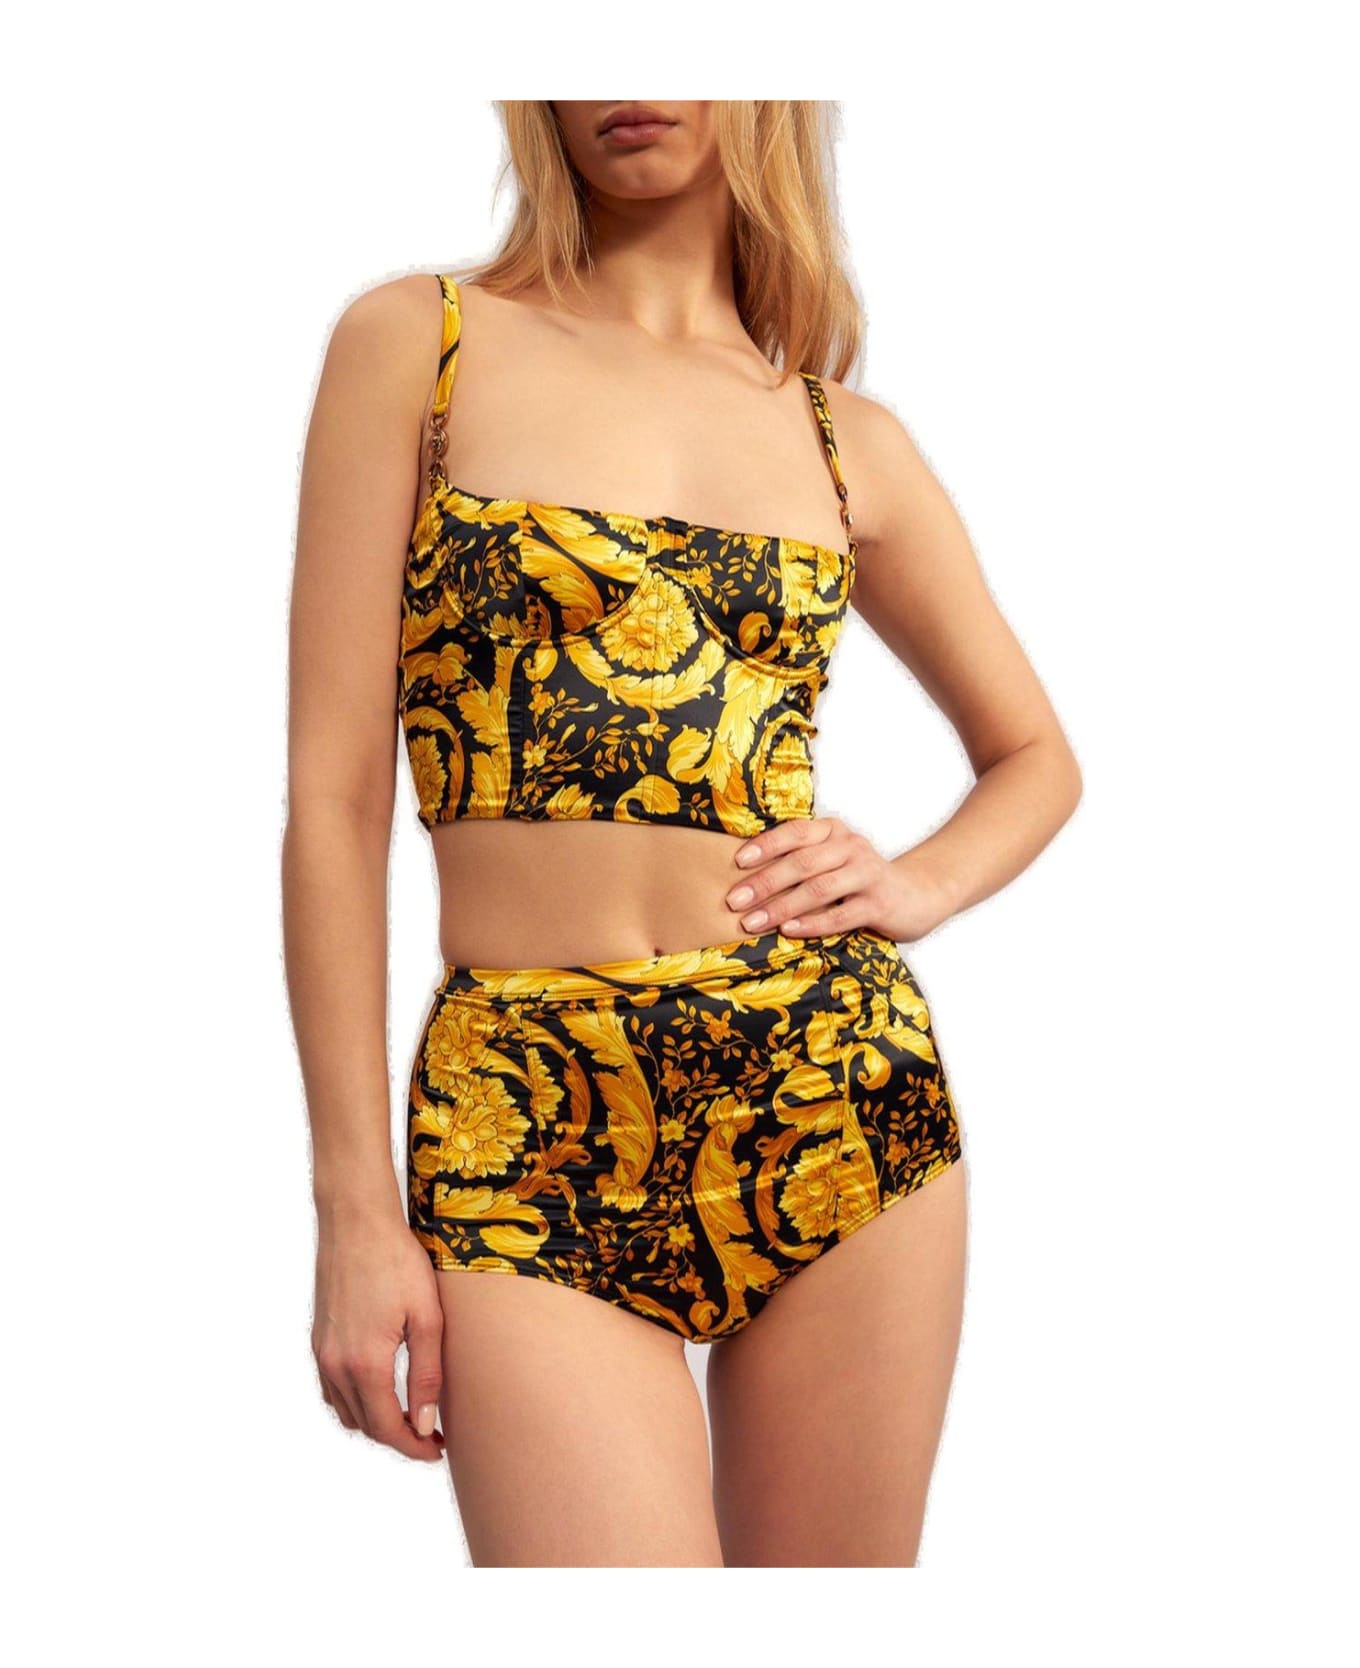 Versace Barocco-printed Stretched Bustier Top - BLACK/YELLOW